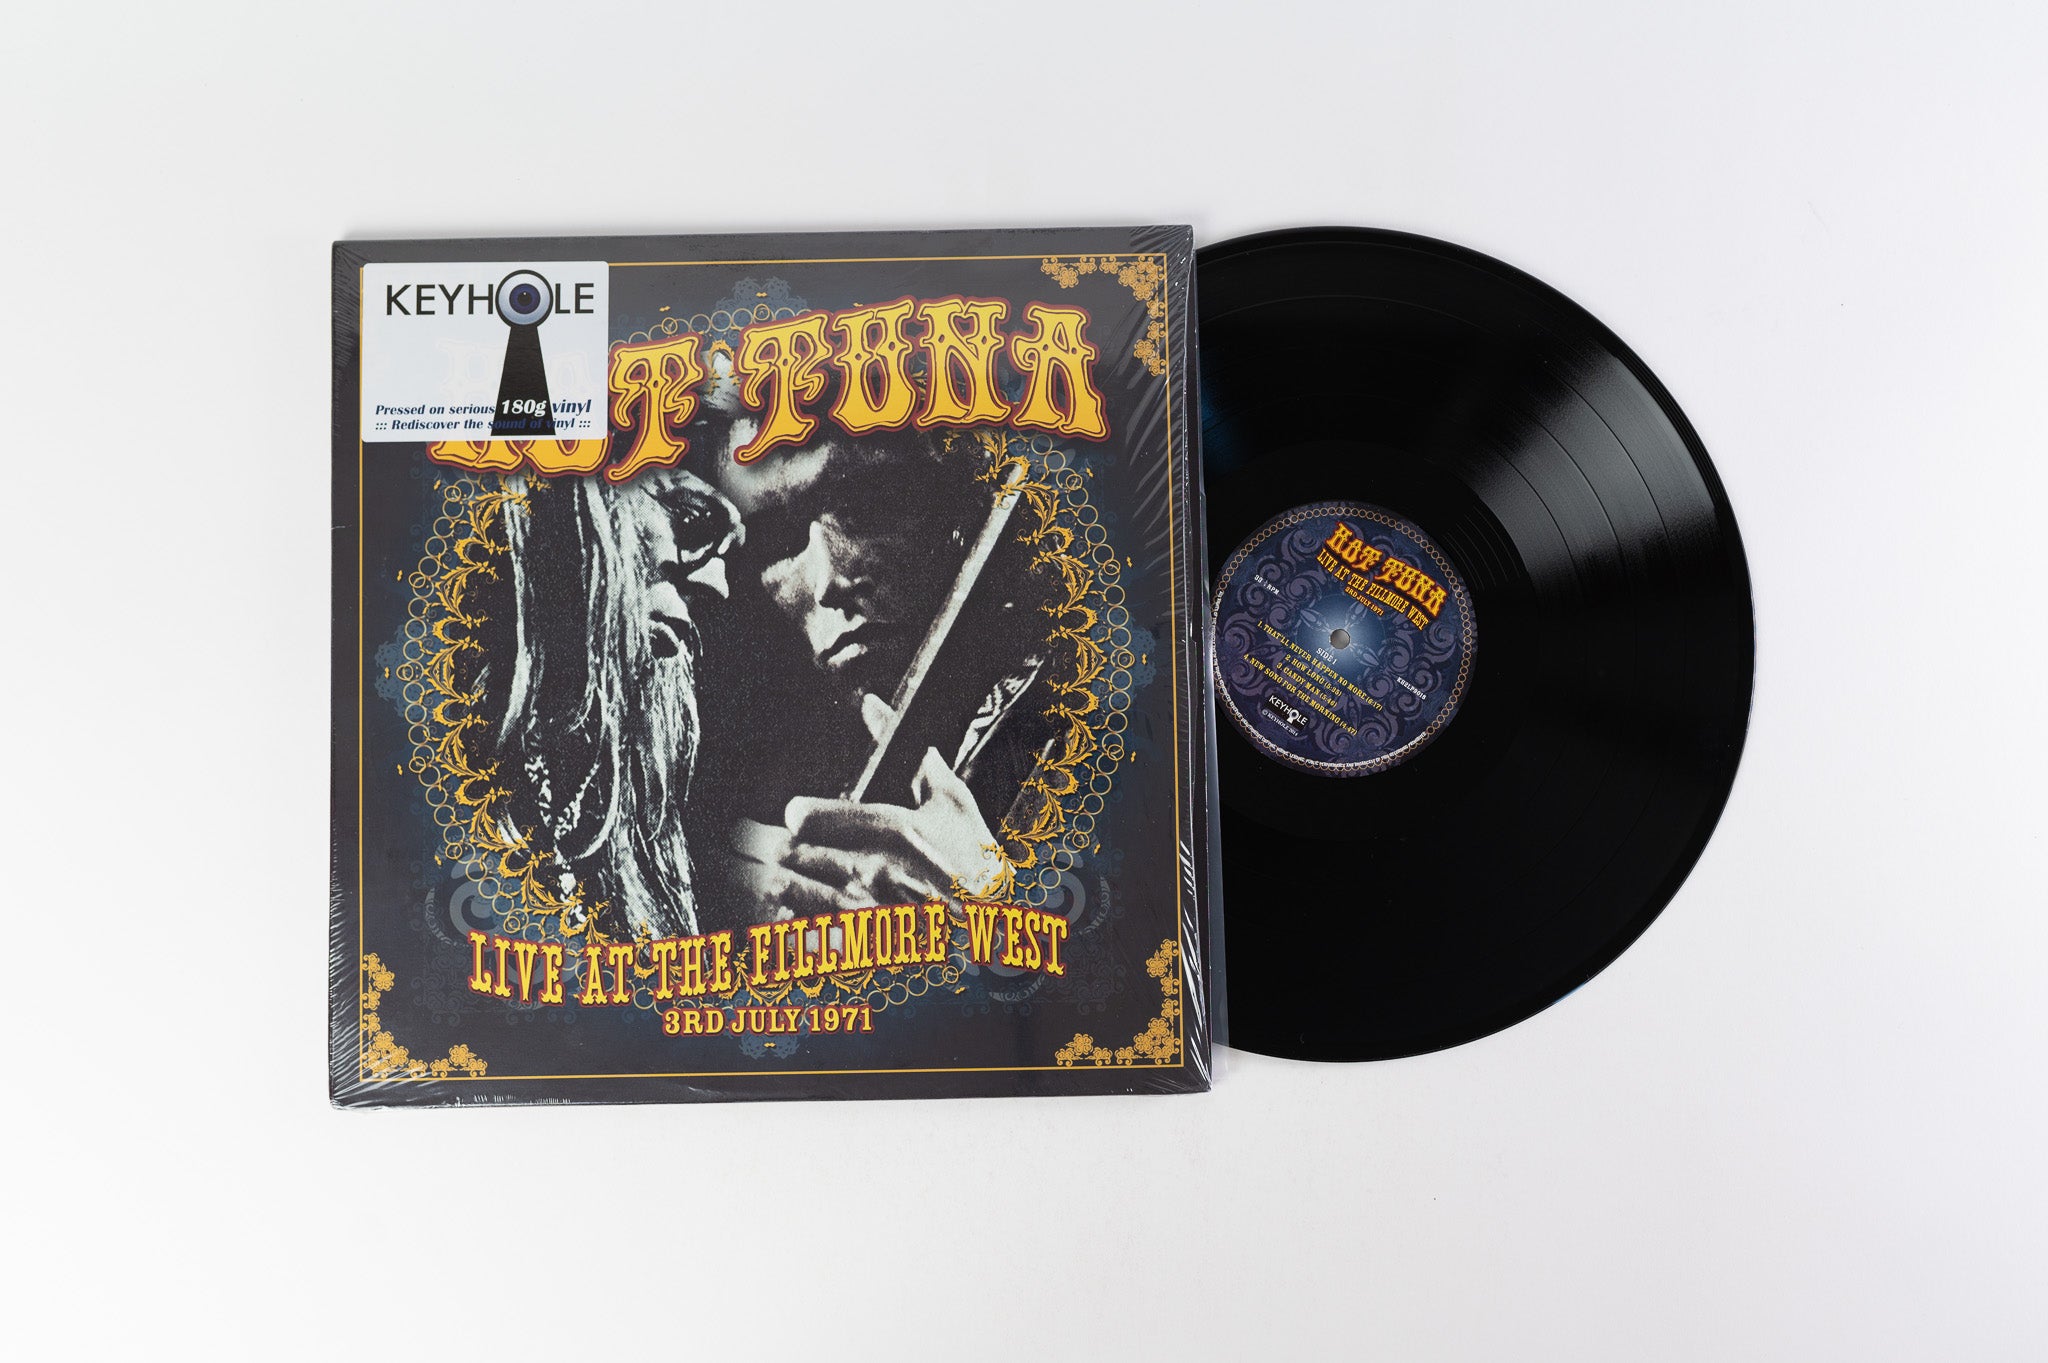 Hot Tuna - Live At The Fillmore West (3rd July 1971) on Keyhole Unofficial Release